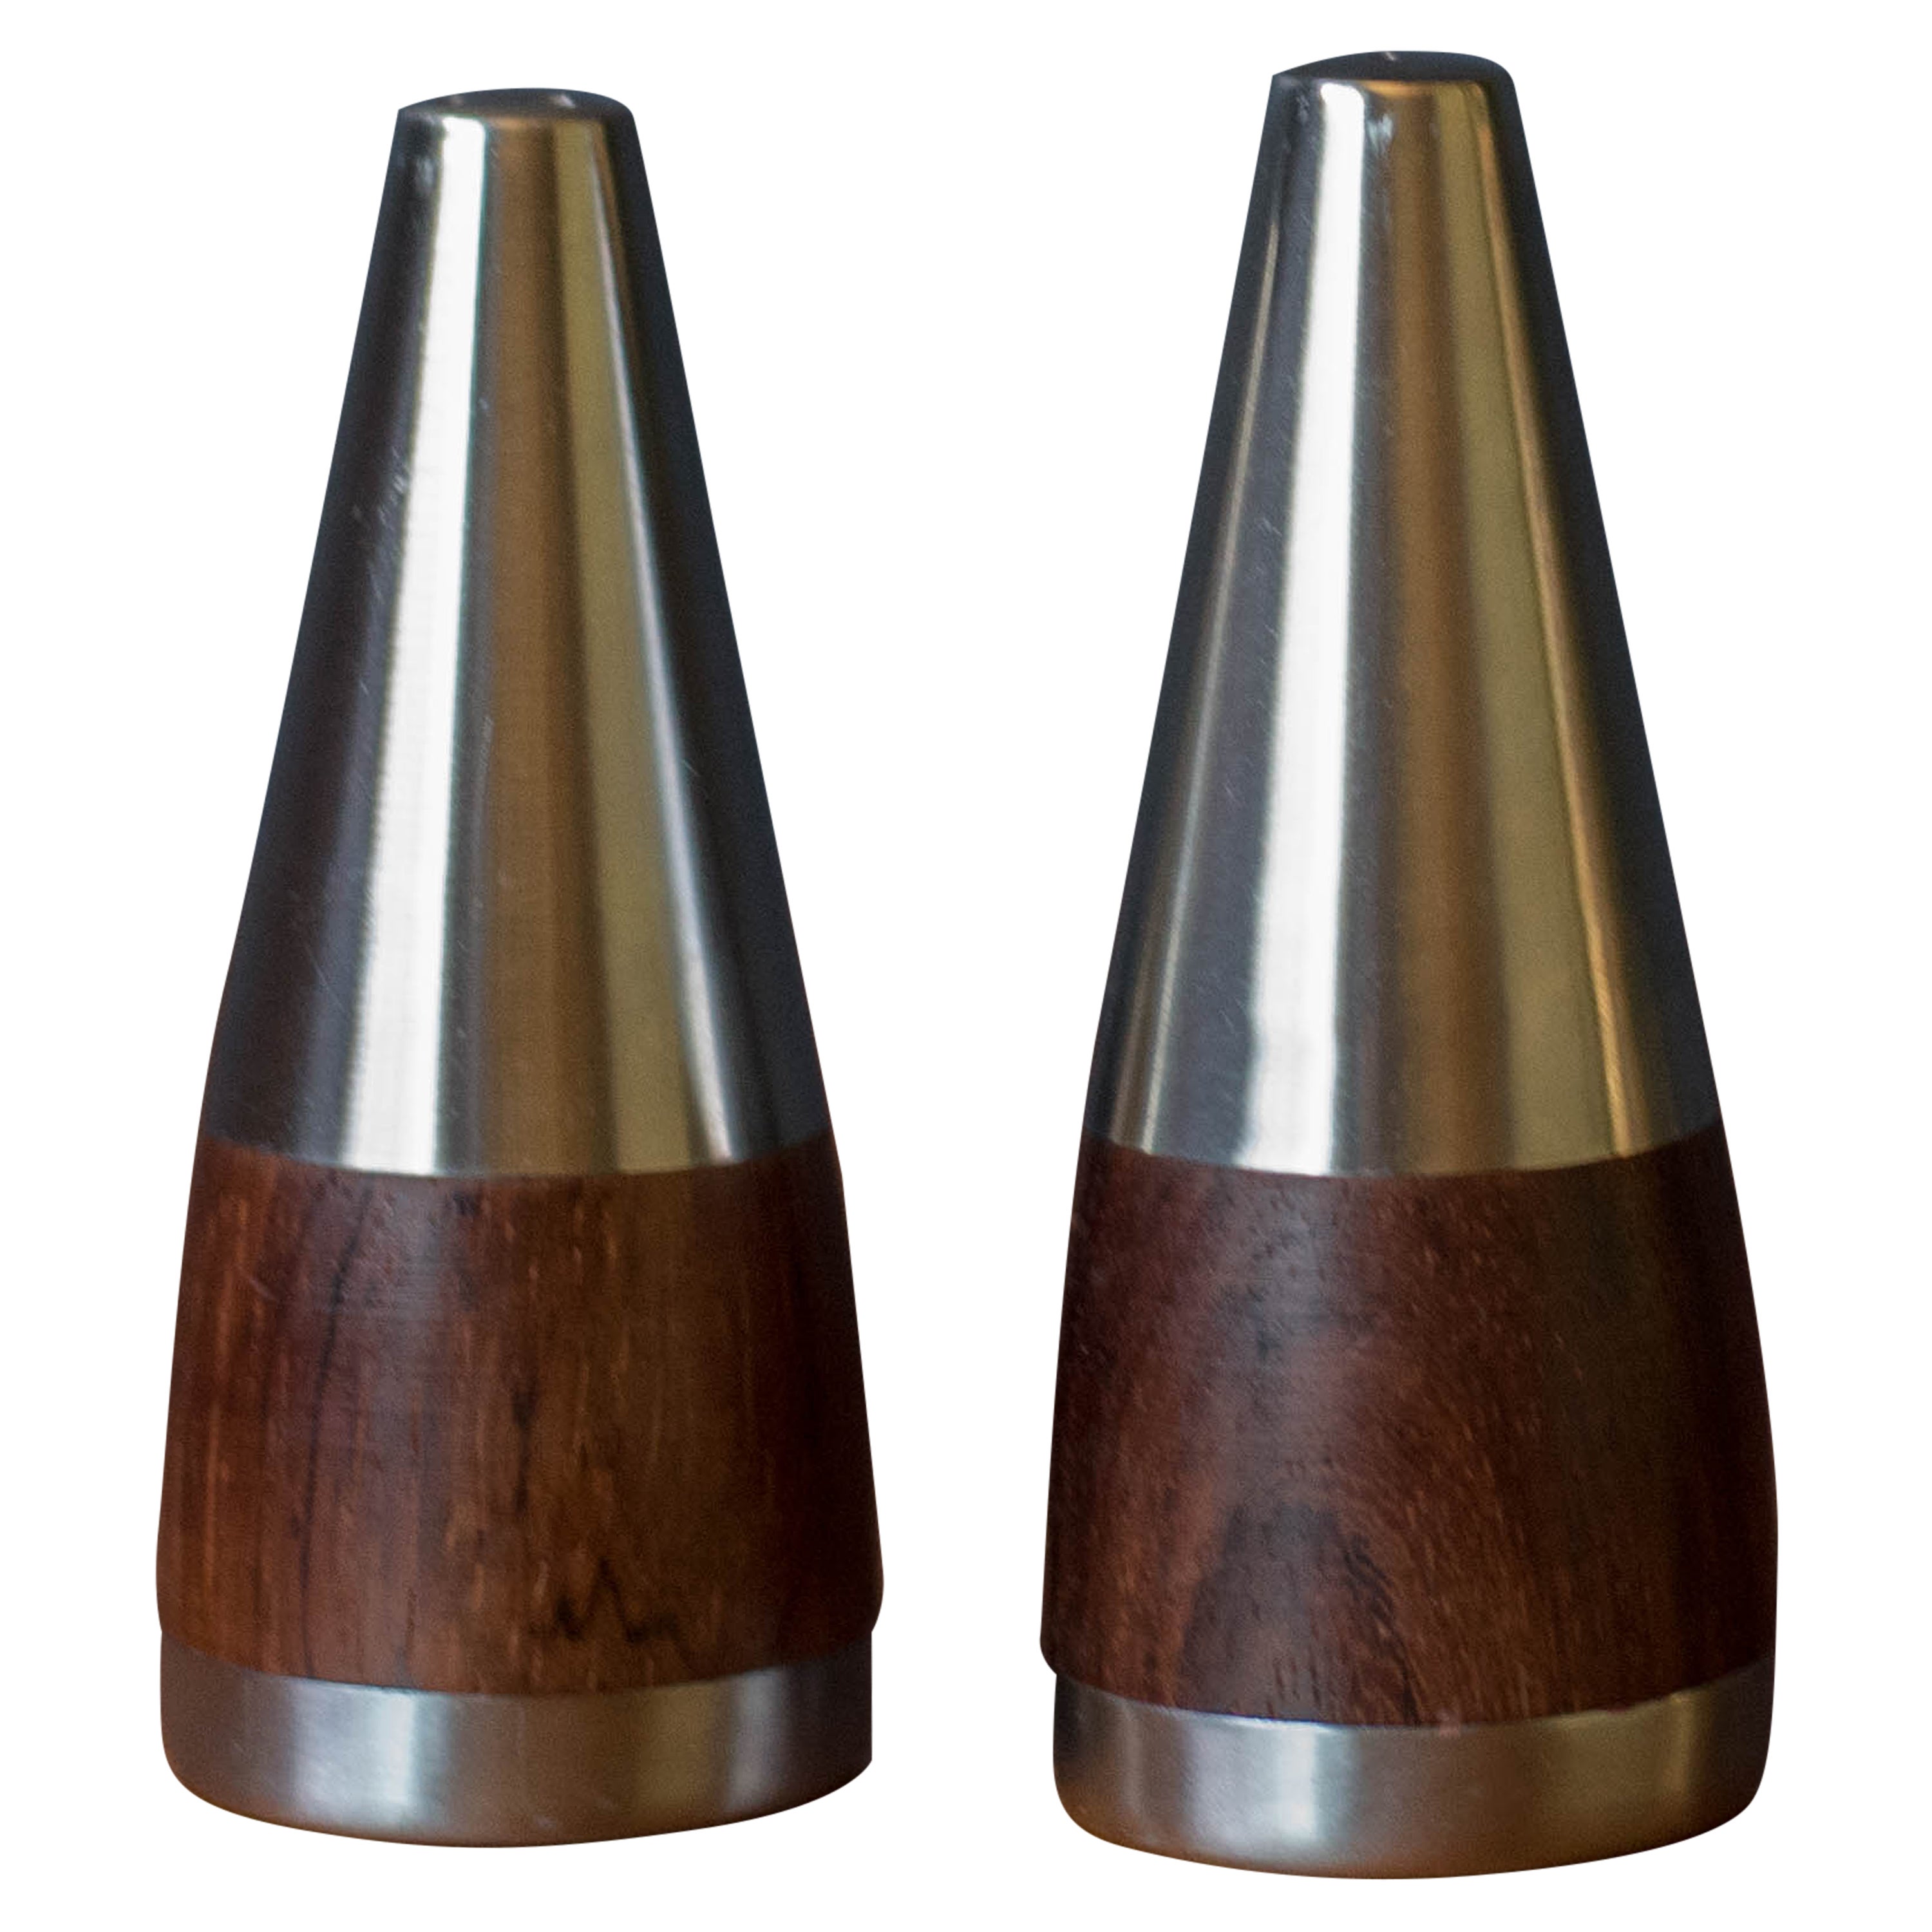 Vintage Danish Pair of Rosewood and Stainless Steel Salt and Pepper Shakers